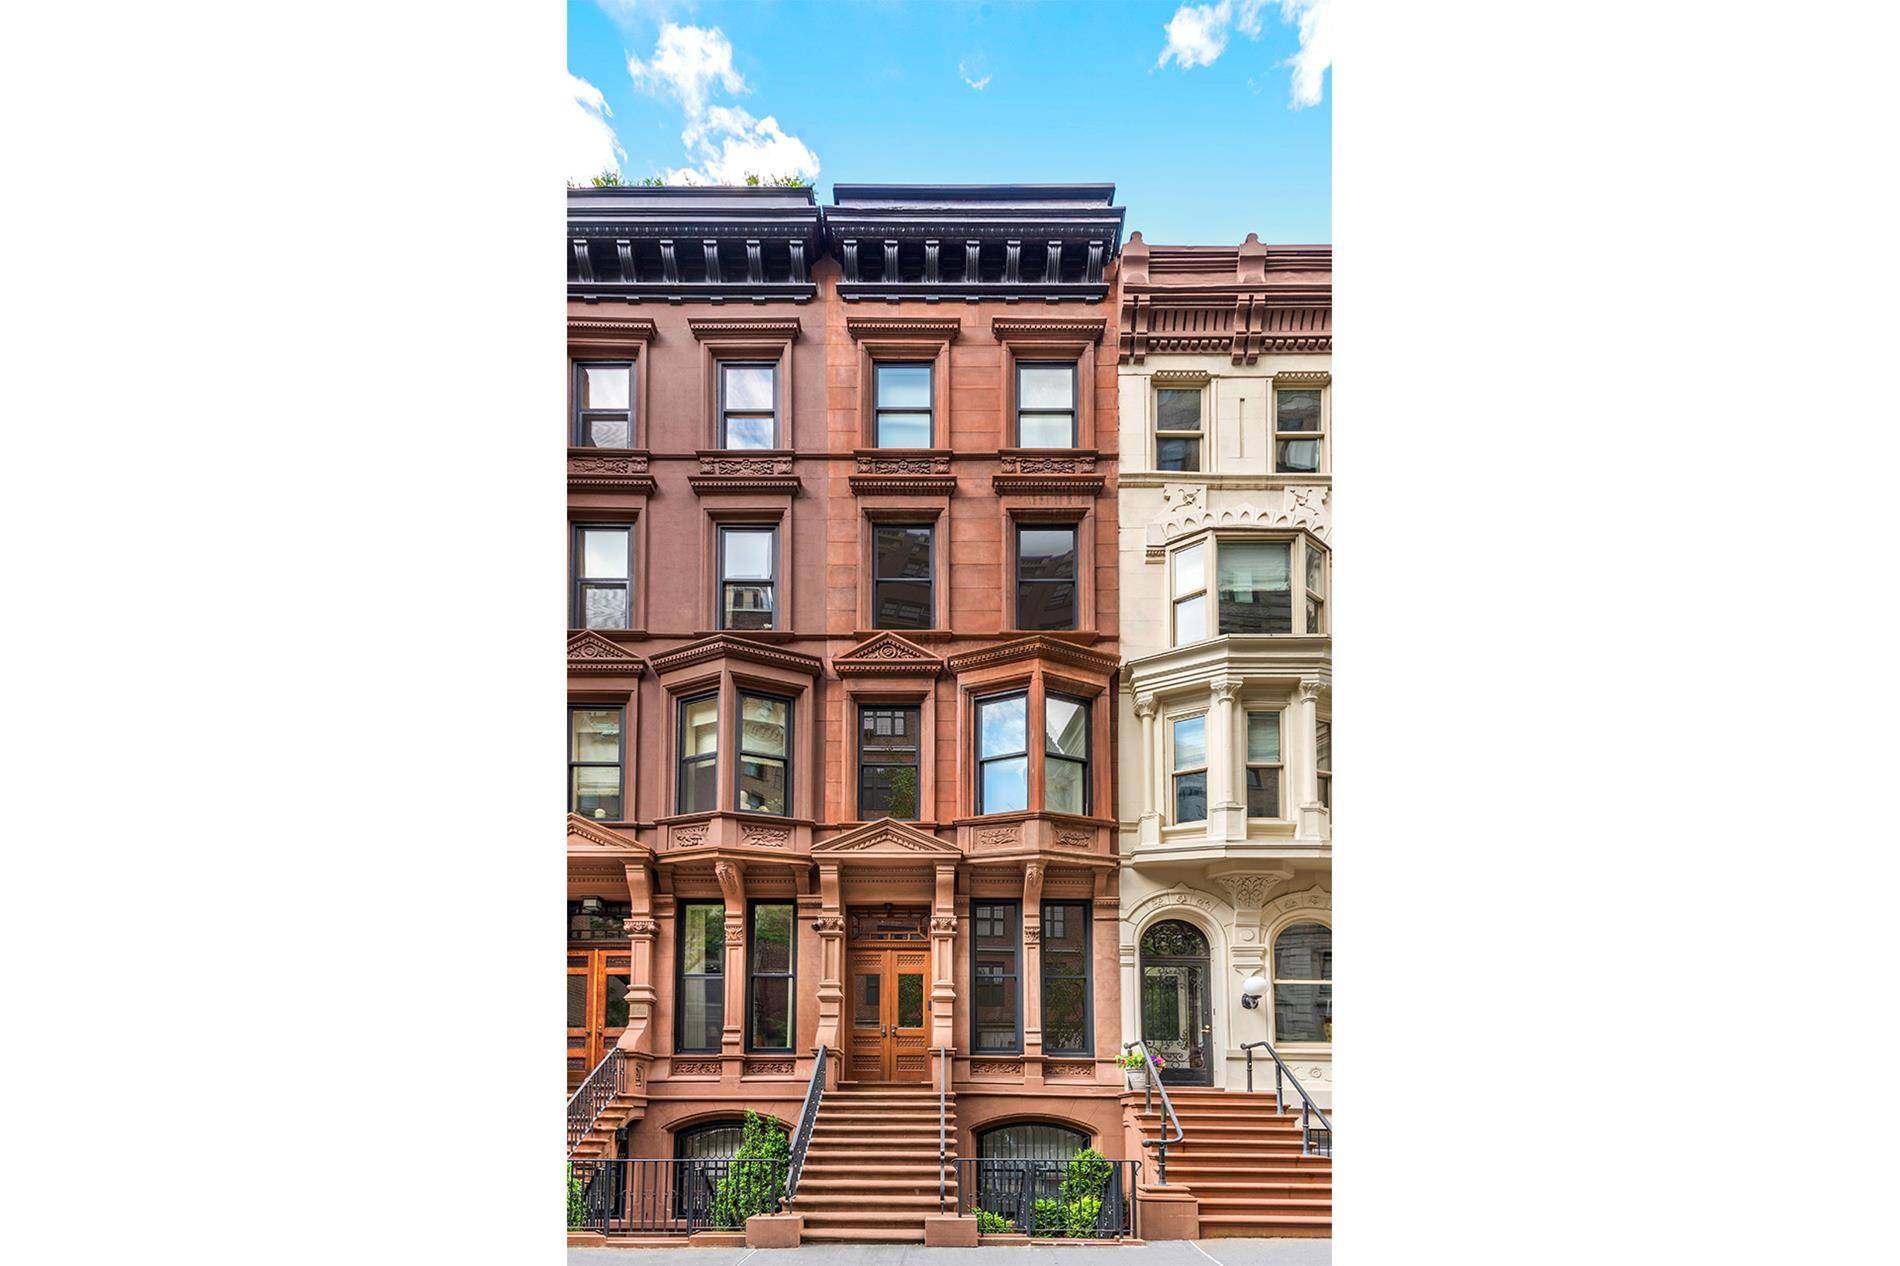 Nestled between Park and Madison Avenues, just a short distance to Central Park, this beautifully reinvented 6, 400 SF historic townhouse features 6 bedrooms and 8 bathrooms across 6 levels, ...